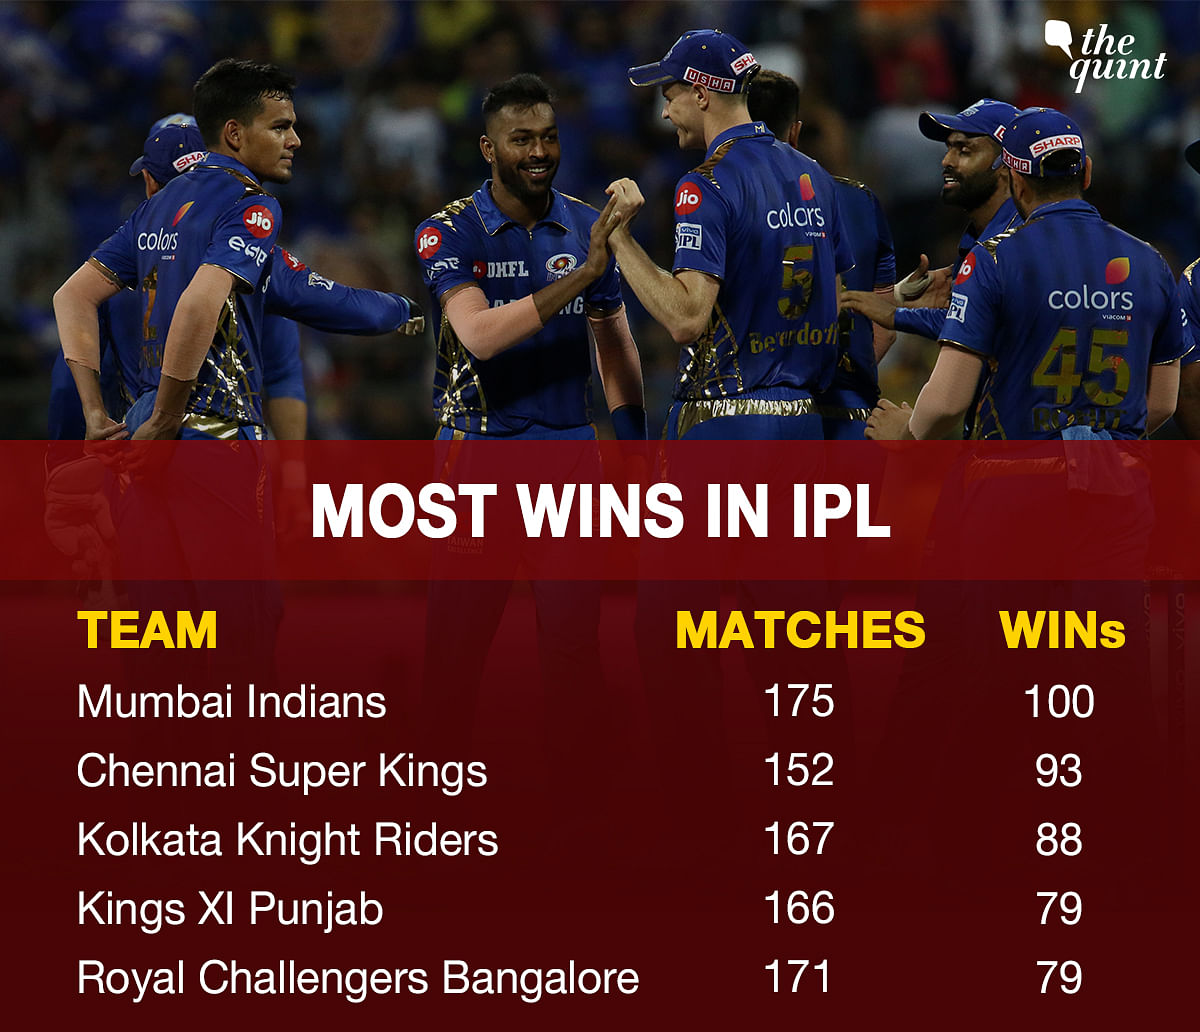 Mumbai Indians defeated Chennai Super Kings by 37 runs at the Wankhede stadium on Wednesday, 3 April.